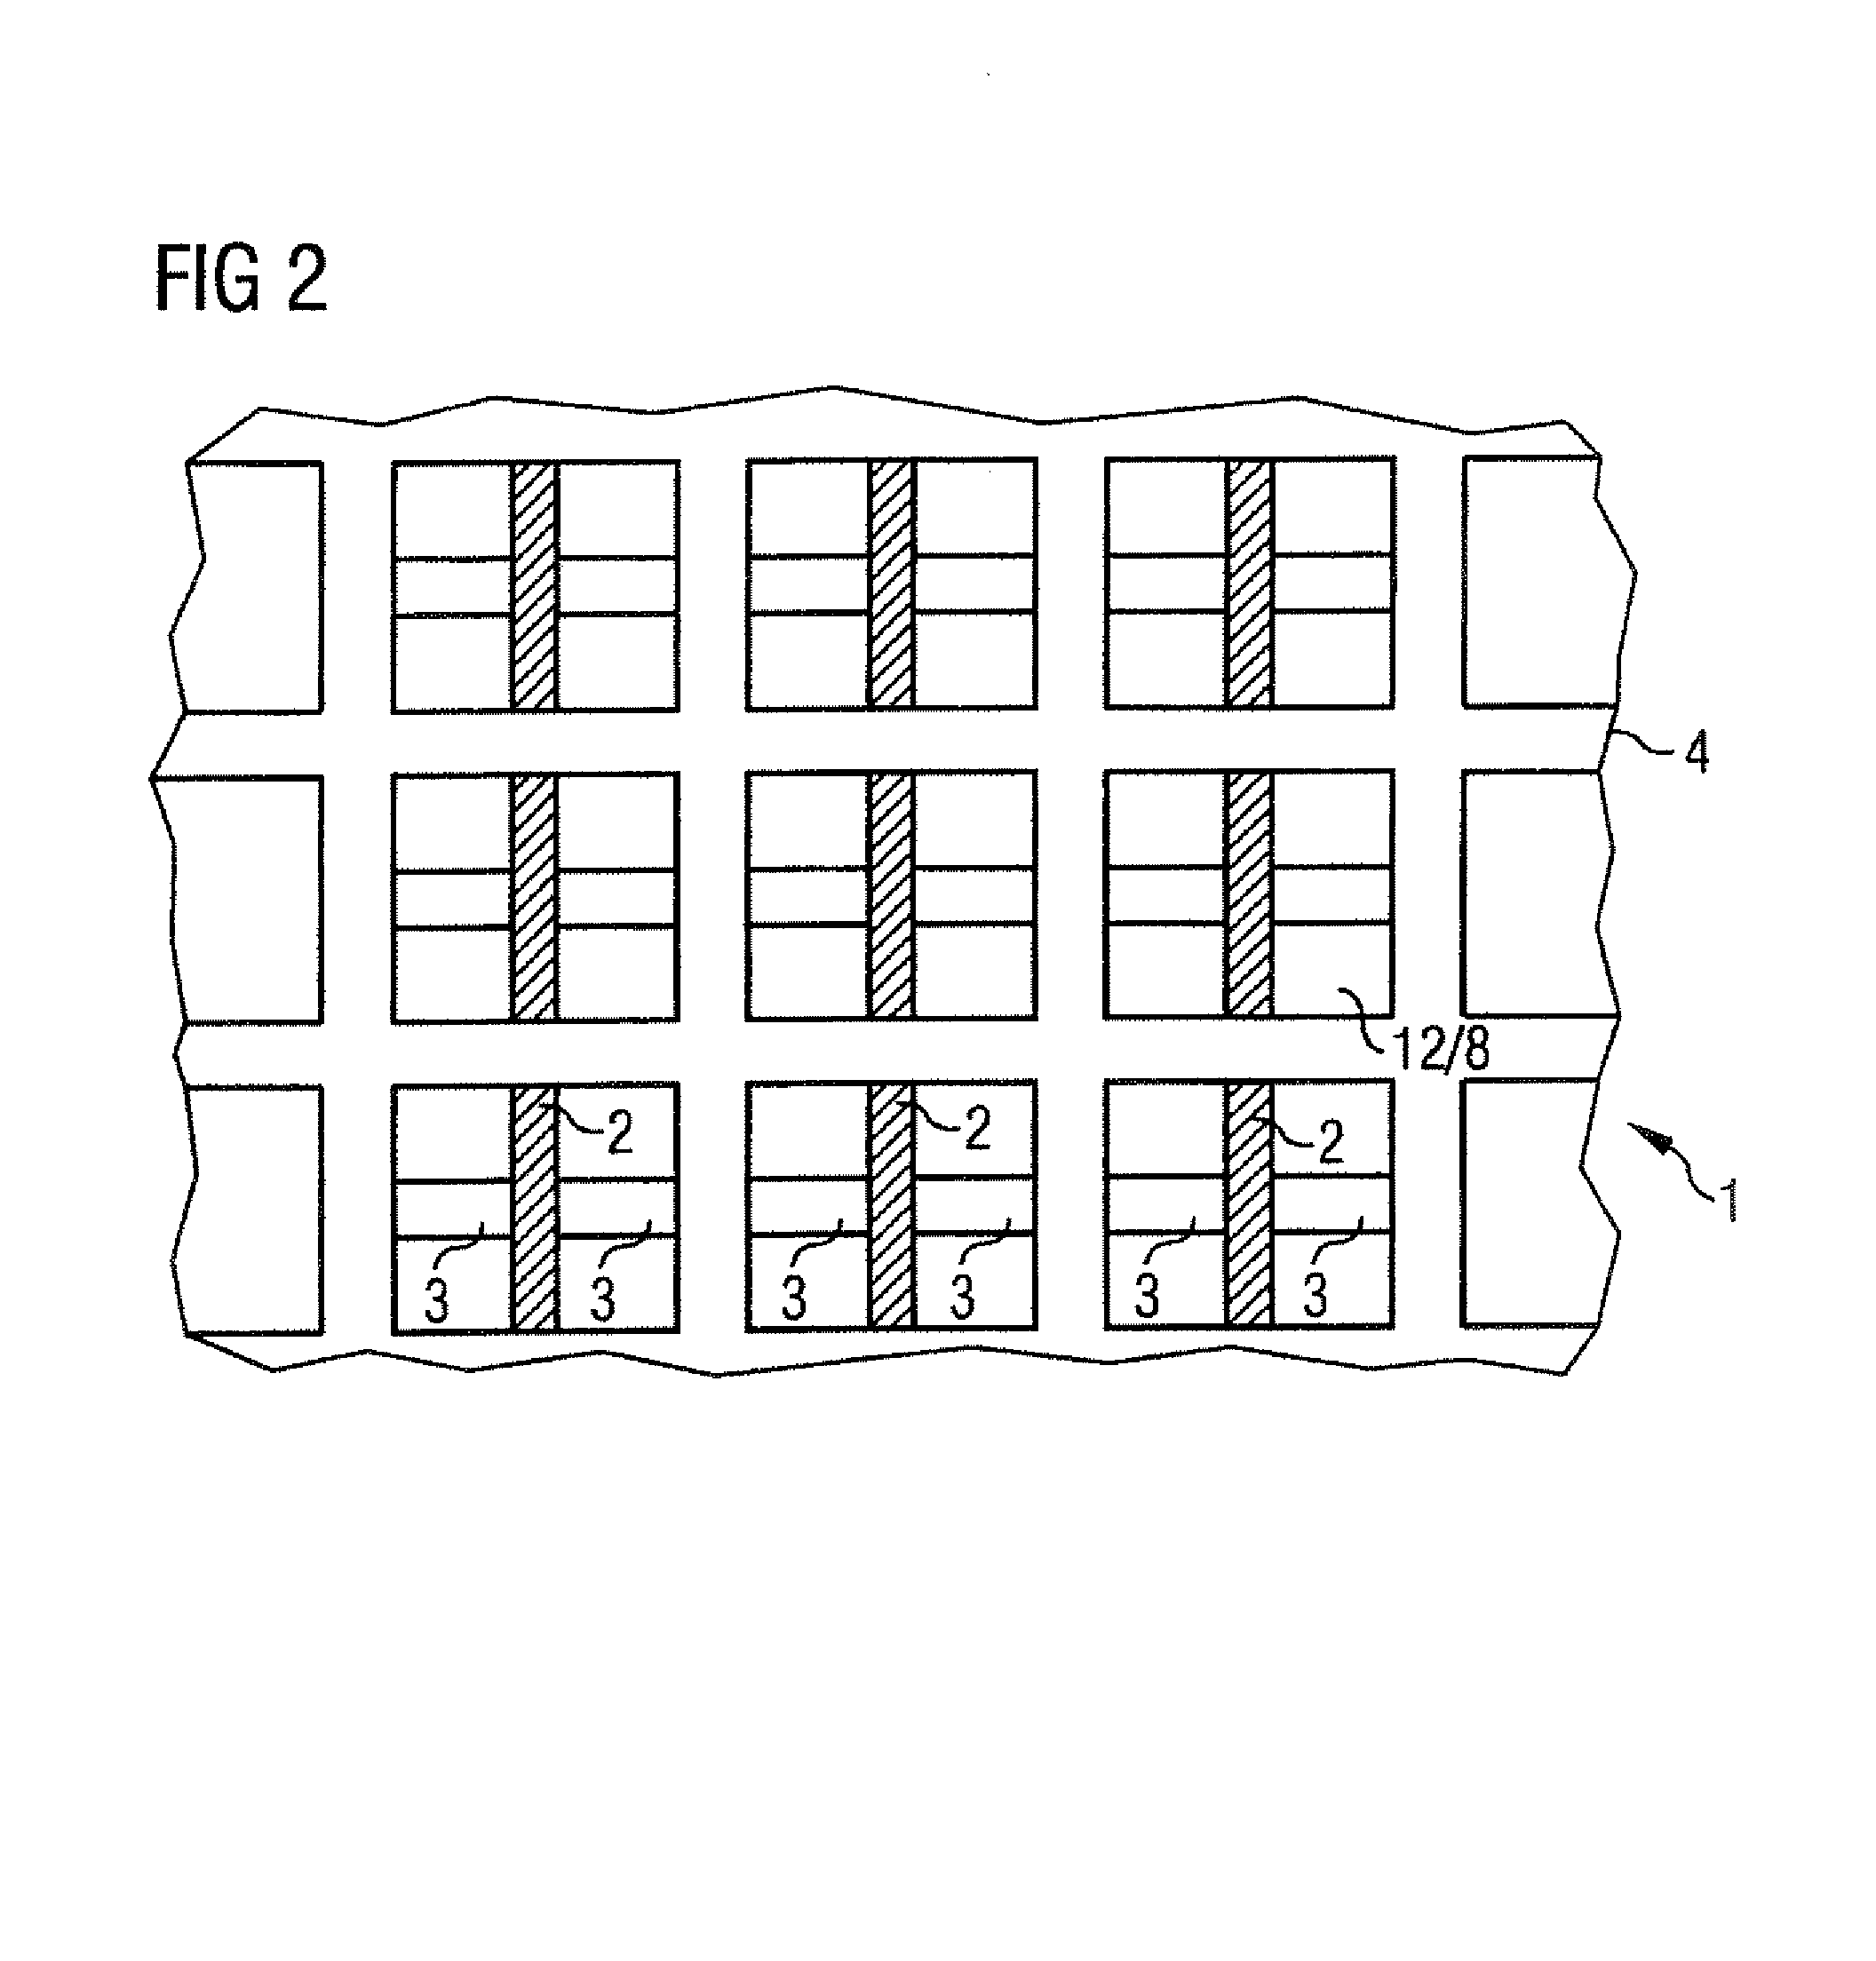 Apparatus for spatial modulation of an x-ray beam